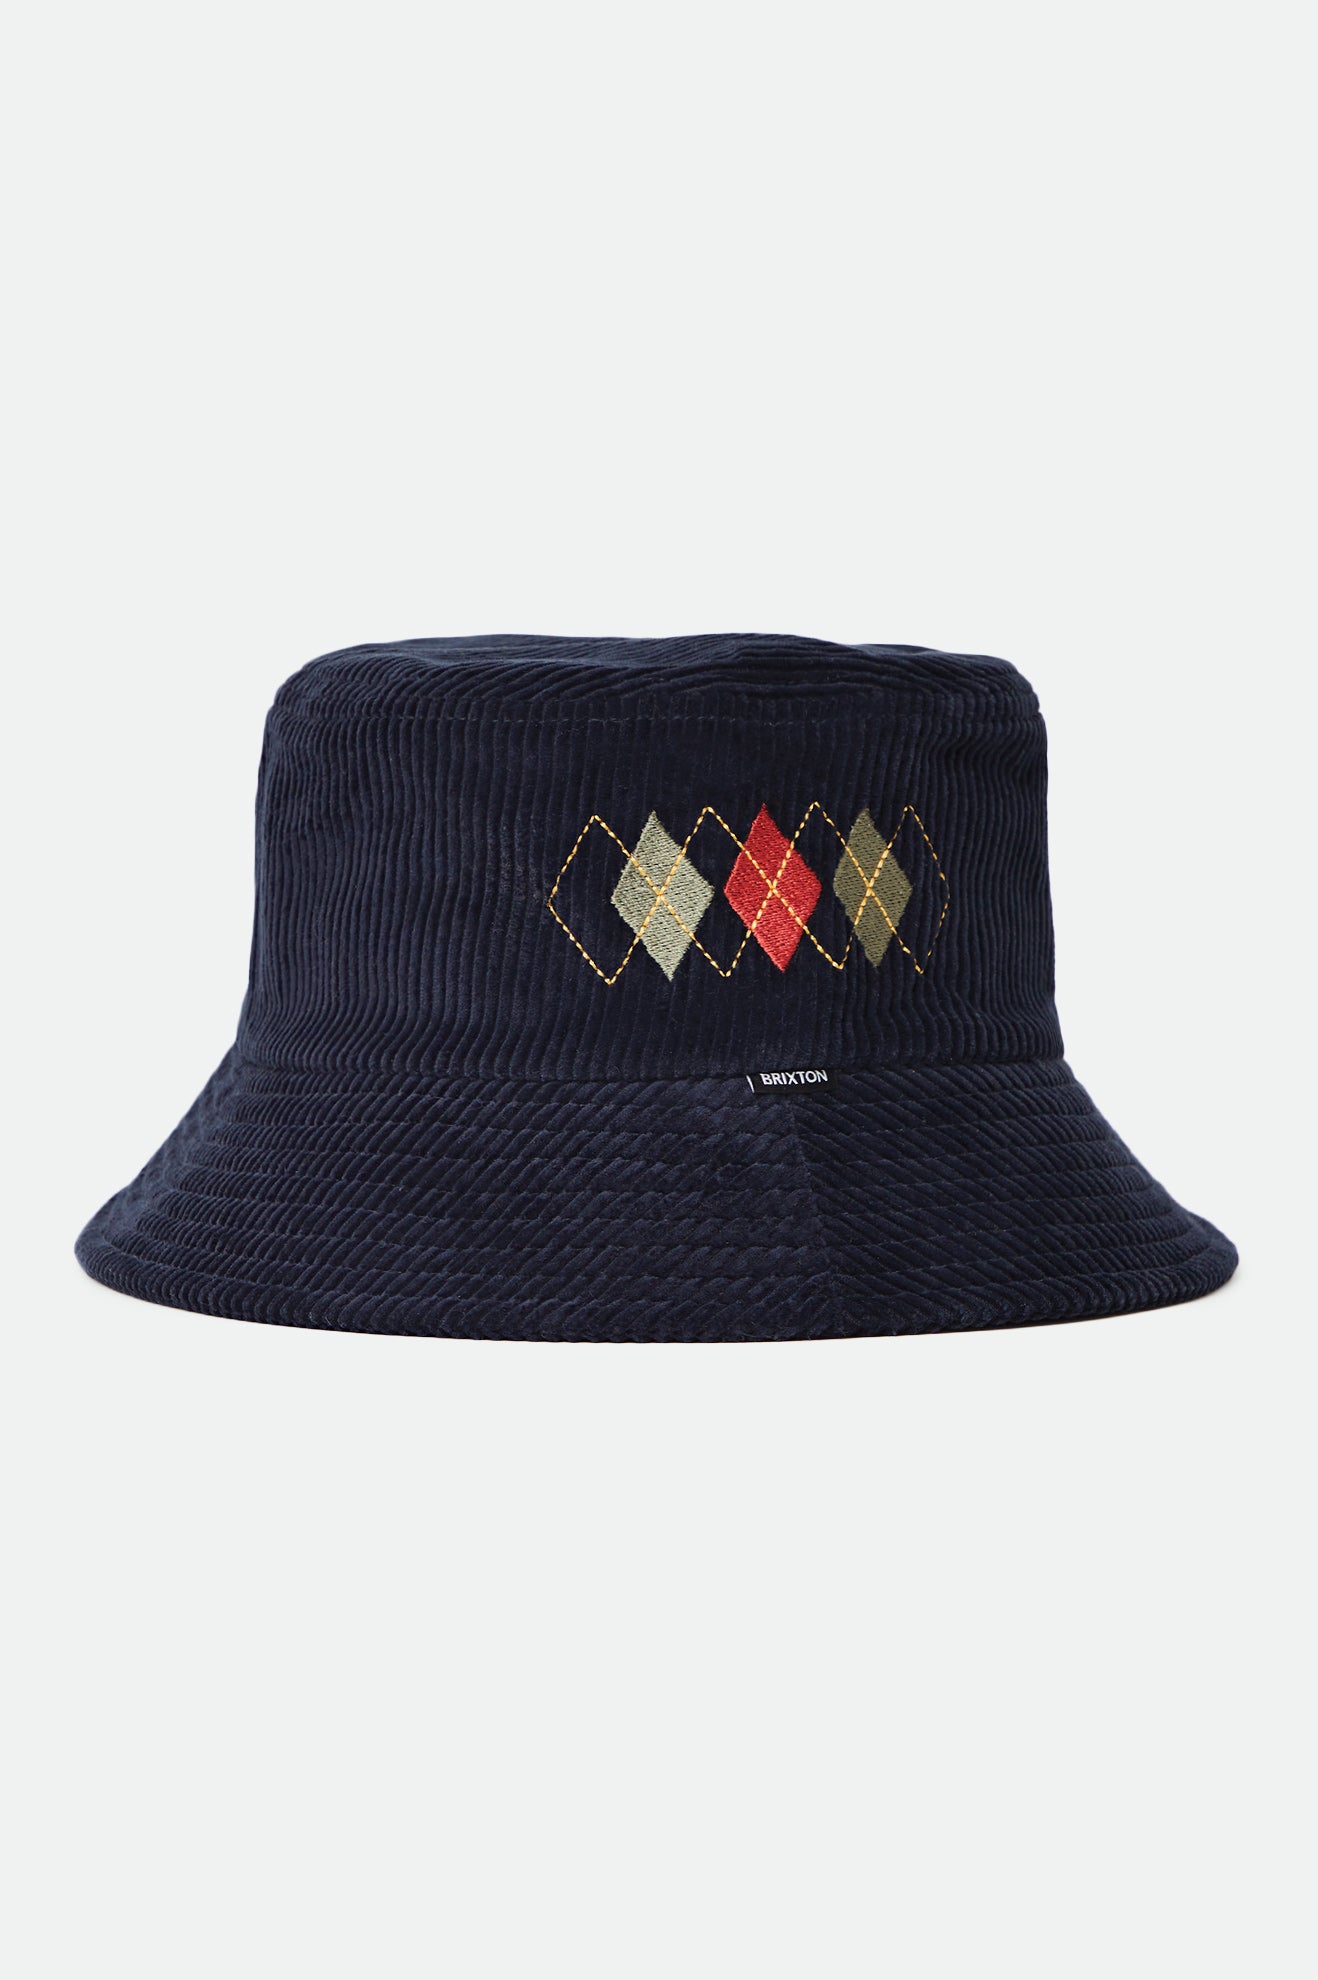 Gramercy Packable Bucket Hat - Washed Navy